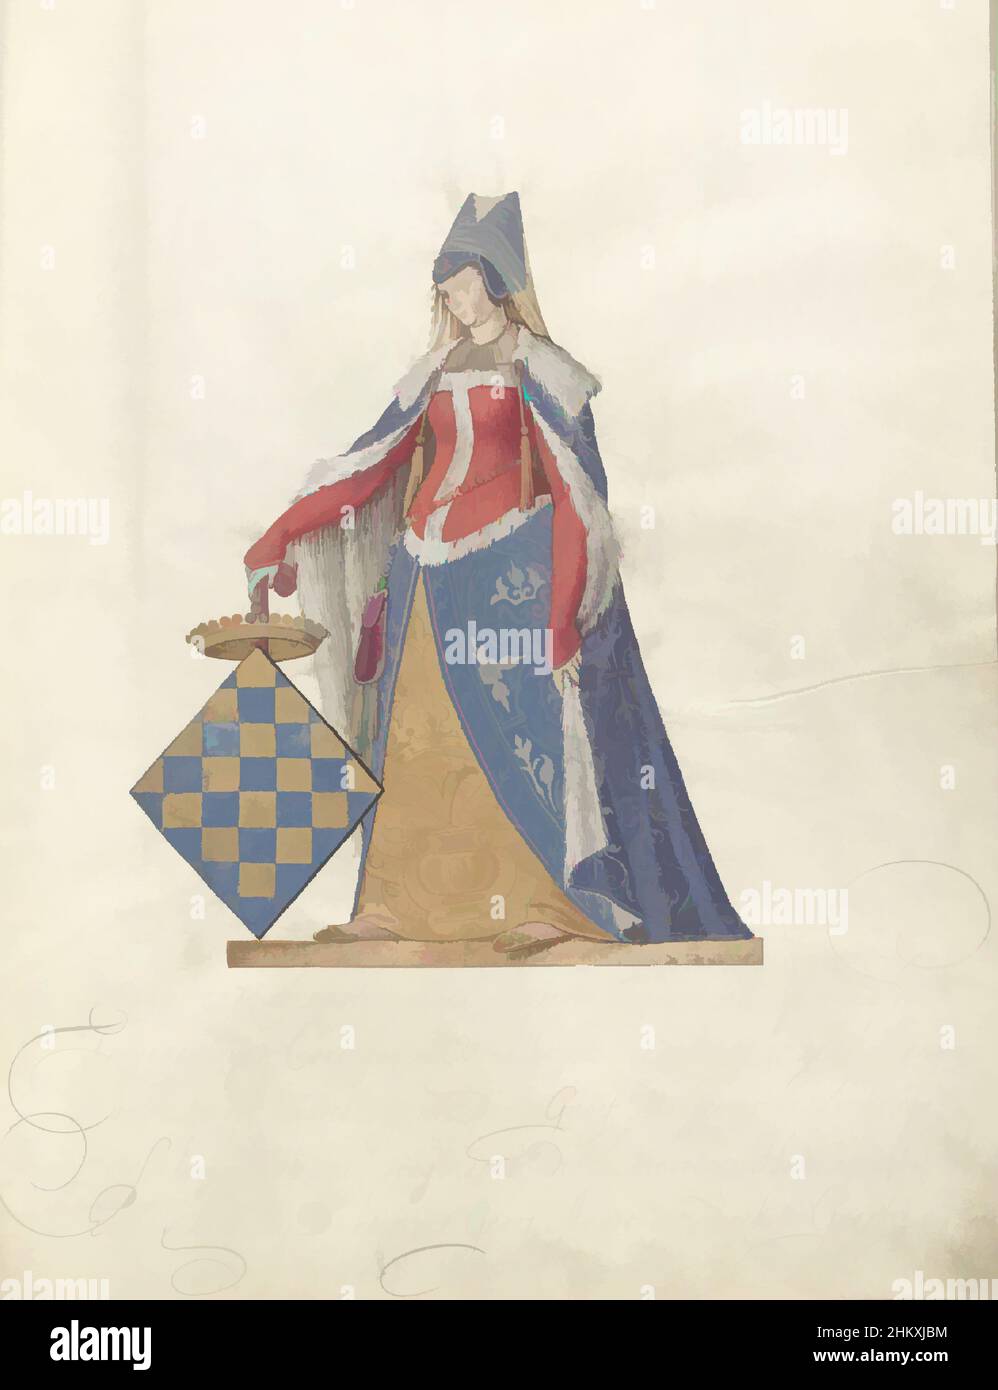 Art inspired by Countess of Teisterbant, Countess of Teisterbant, wife of Boudewijn Count of Teisterbant. She was daughter of the Count of Vermandois. Standing full-length with the coat of arms of Vermandois. Part of illustrated manuscript containing the genealogy of the lords and, Classic works modernized by Artotop with a splash of modernity. Shapes, color and value, eye-catching visual impact on art. Emotions through freedom of artworks in a contemporary way. A timeless message pursuing a wildly creative new direction. Artists turning to the digital medium and creating the Artotop NFT Stock Photo